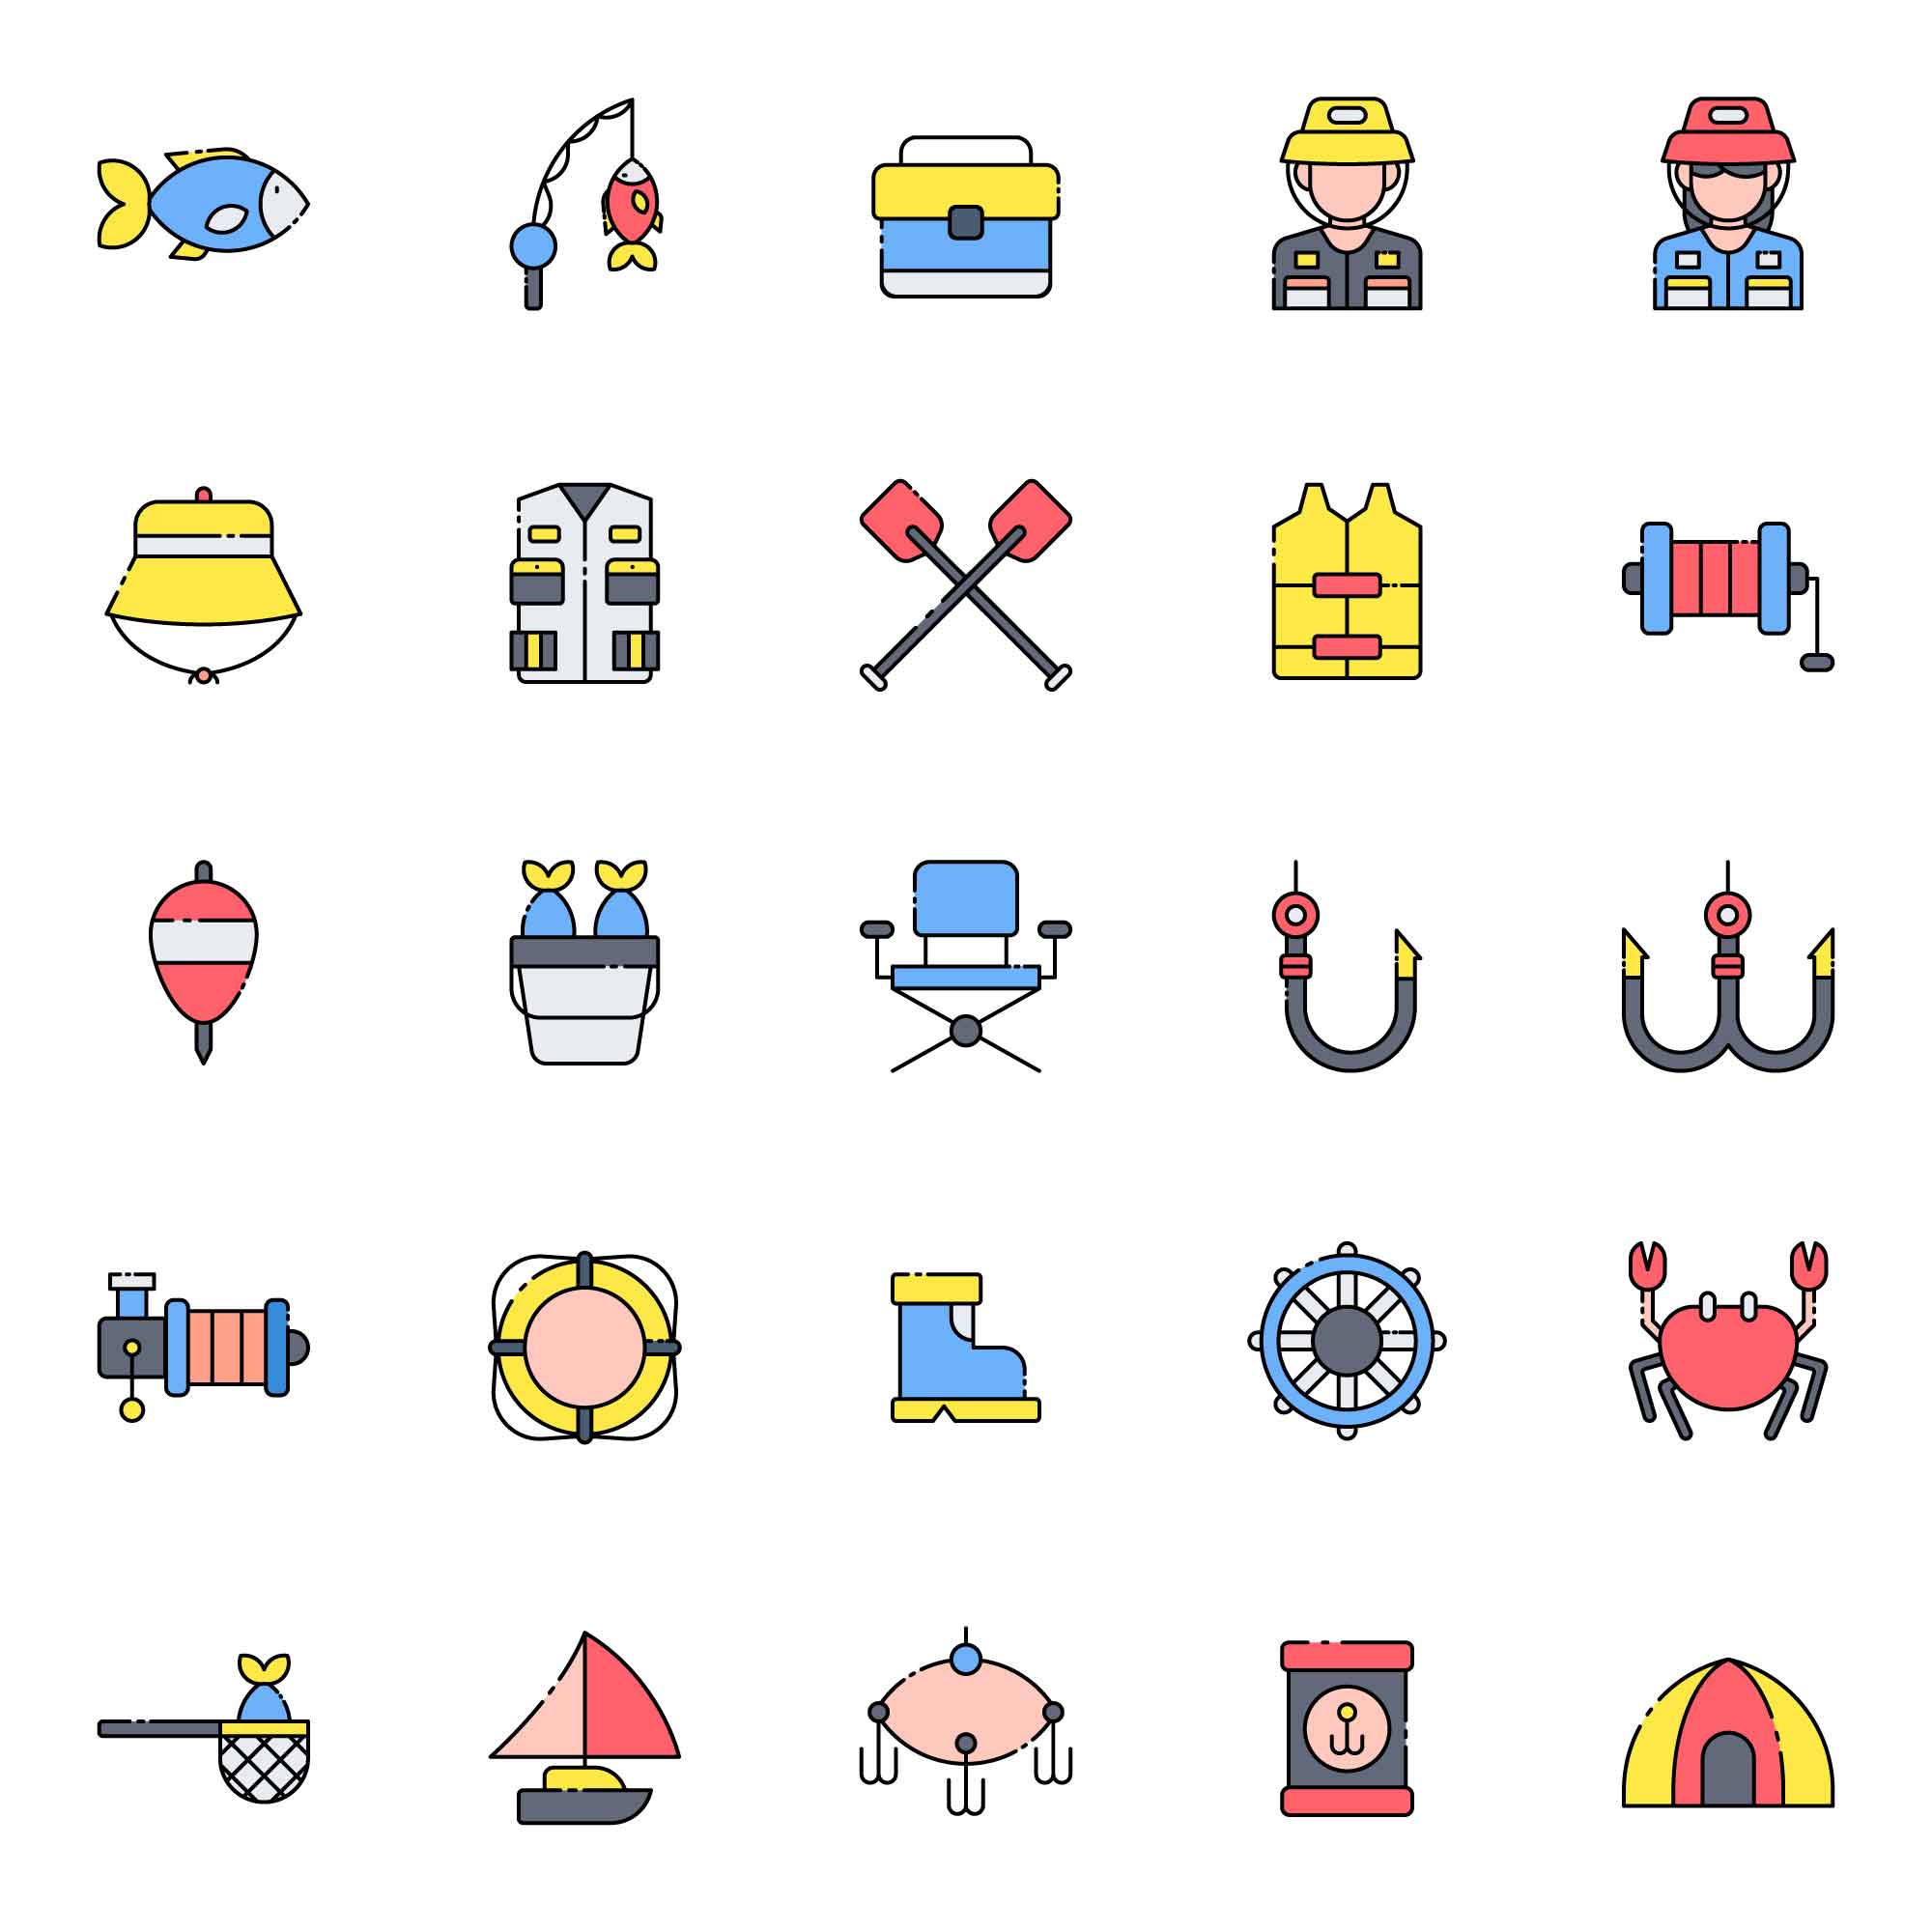 25 Free Colored Fisherman Icons